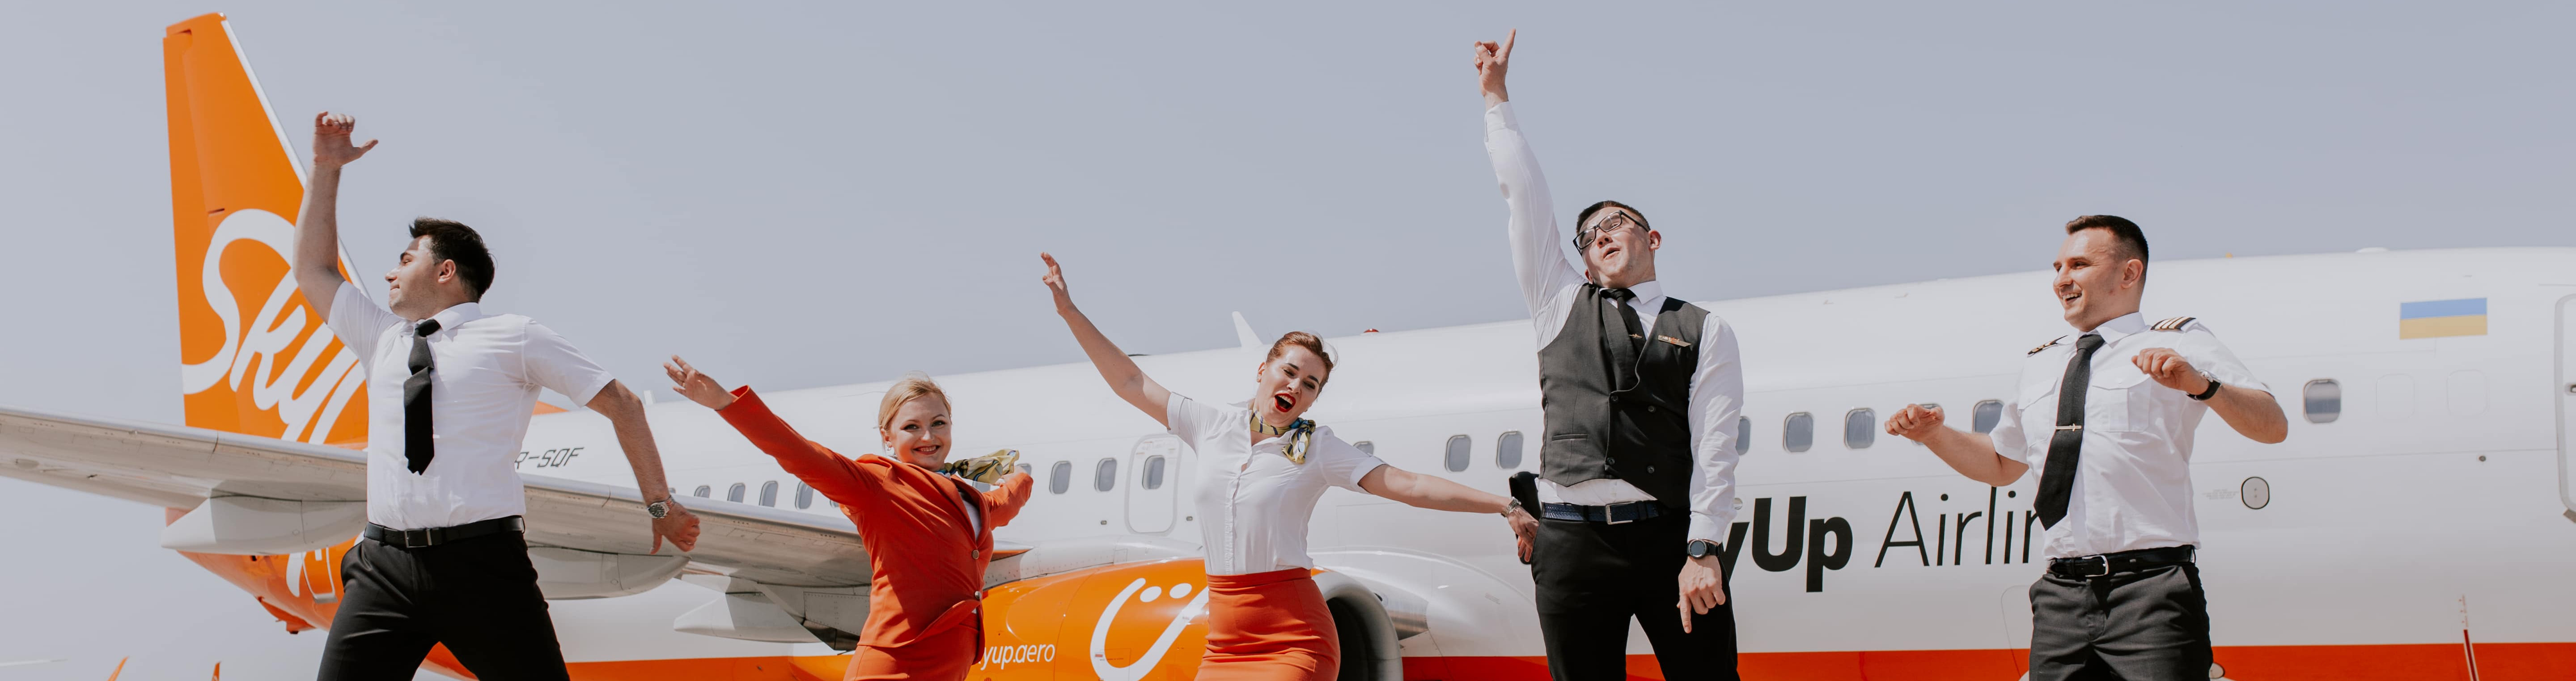 You want – you fly: CityBreak on the wings of SkyUp Airlines